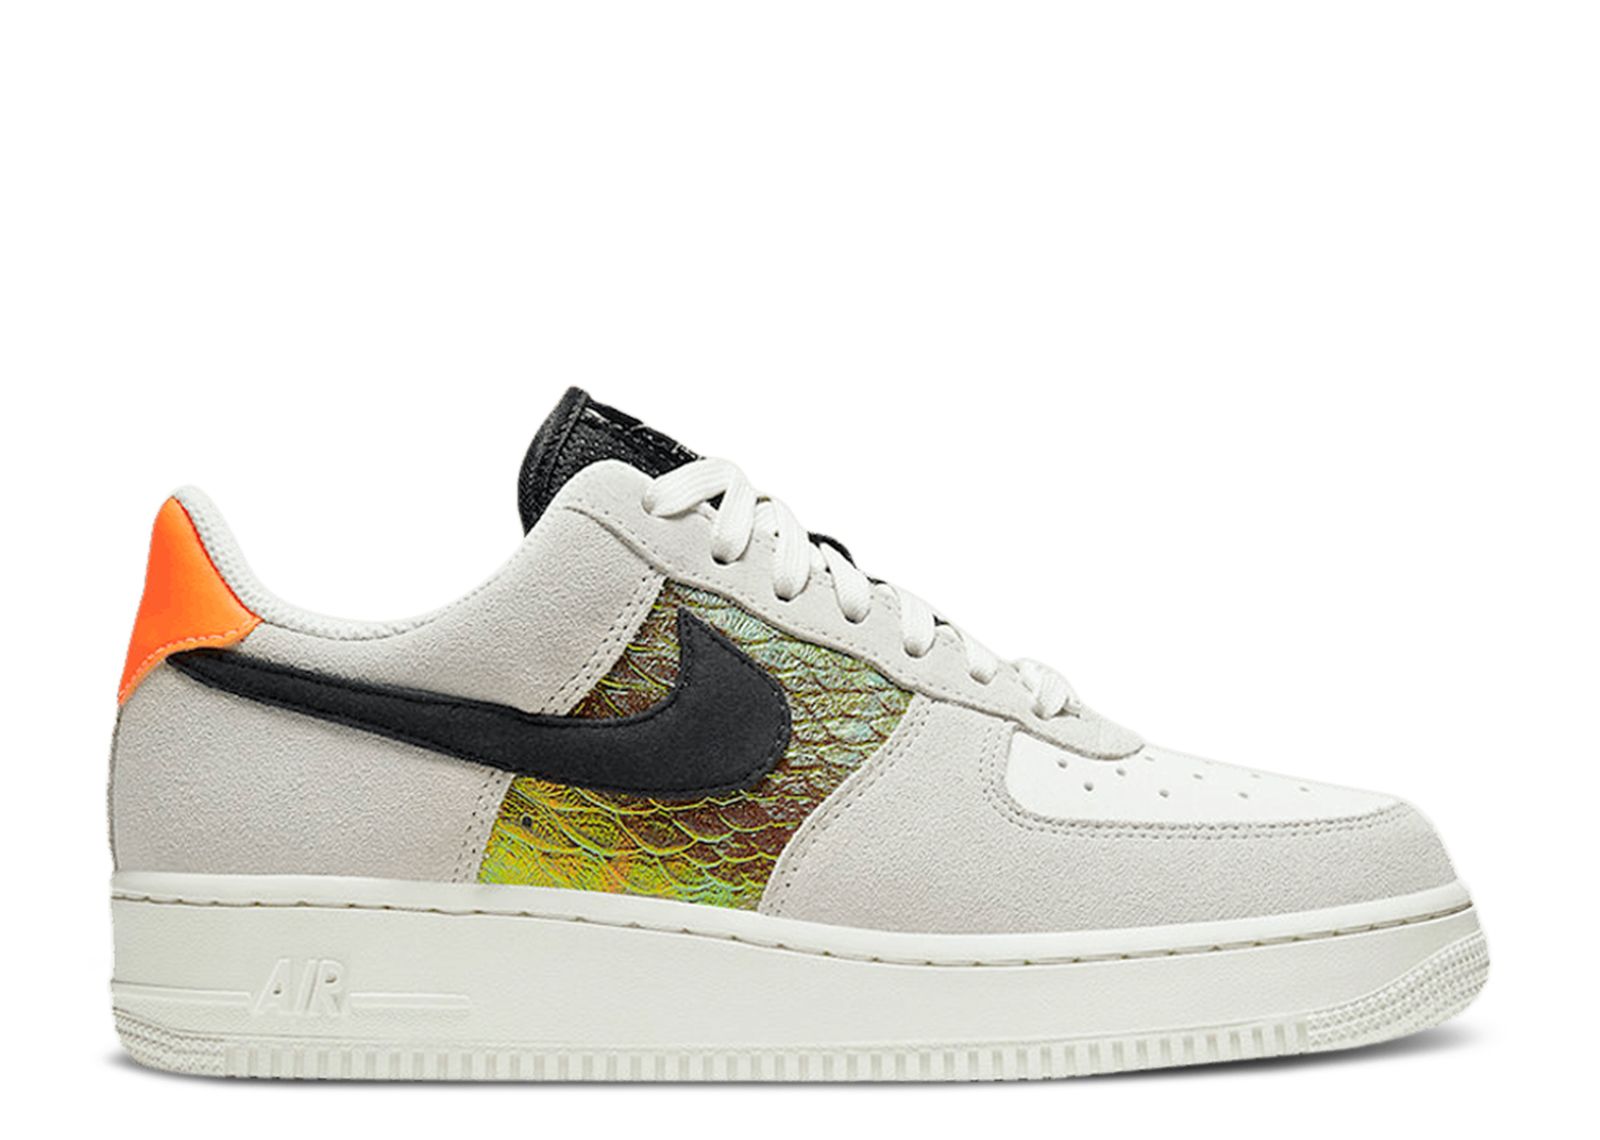 Second Chance - free Nike Air Force 1 Low Iridescent Snakeskin - 36 | NEW